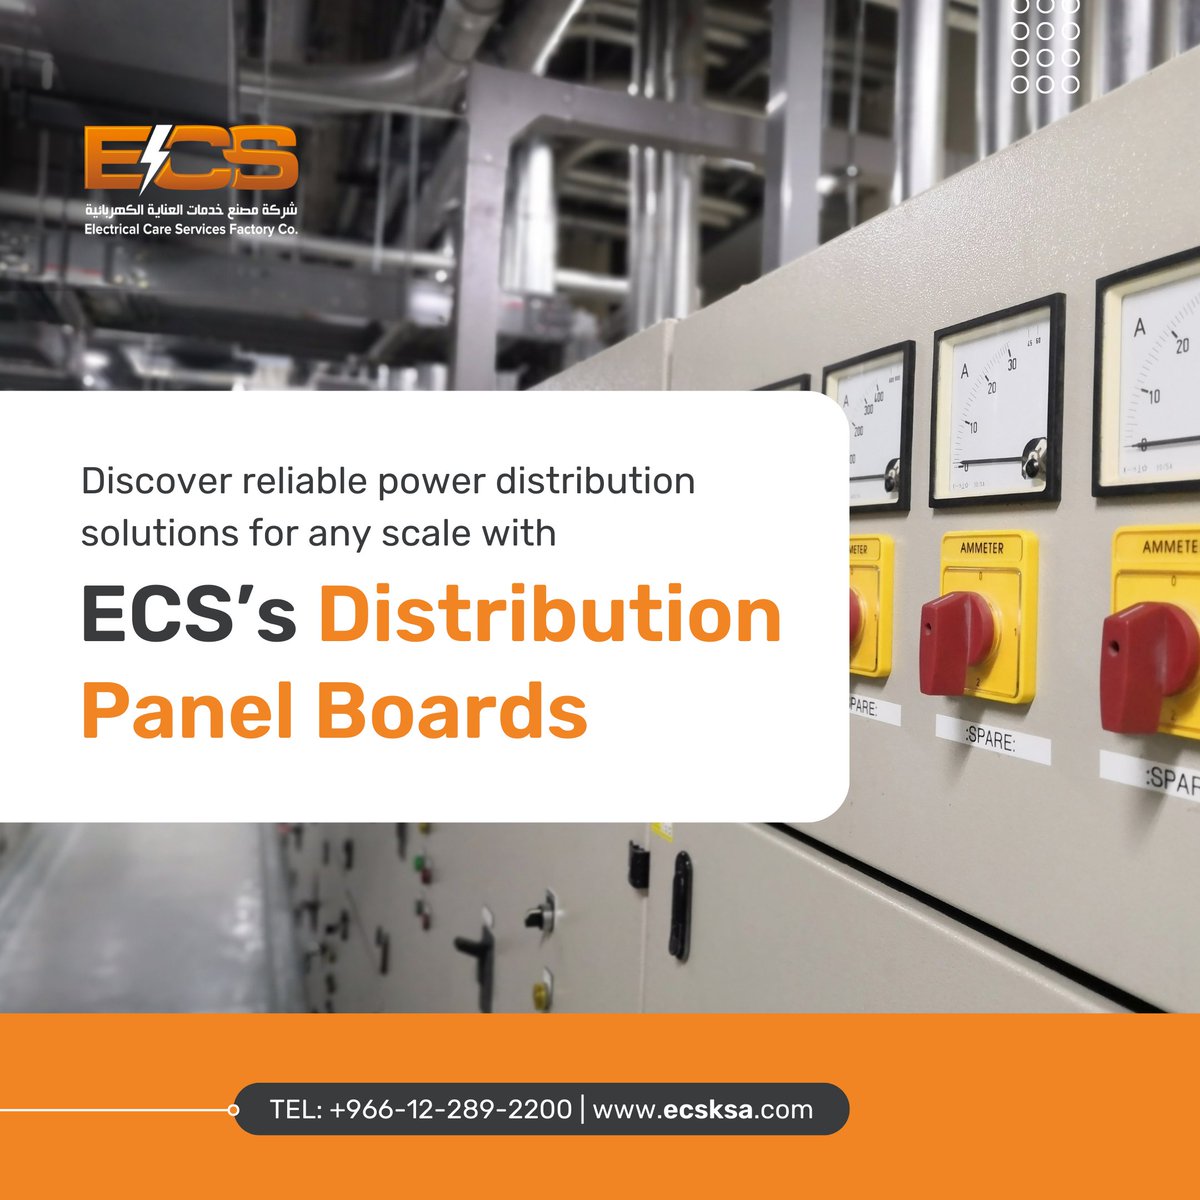 Discover reliable power distribution solutions with ECS (Electrical Care Services) for any scale.

#ecsksa #powermanagement #electricalindustry #powerdistribution #engineeringsolutions #power #jeddah #riyadh #saudiarabia